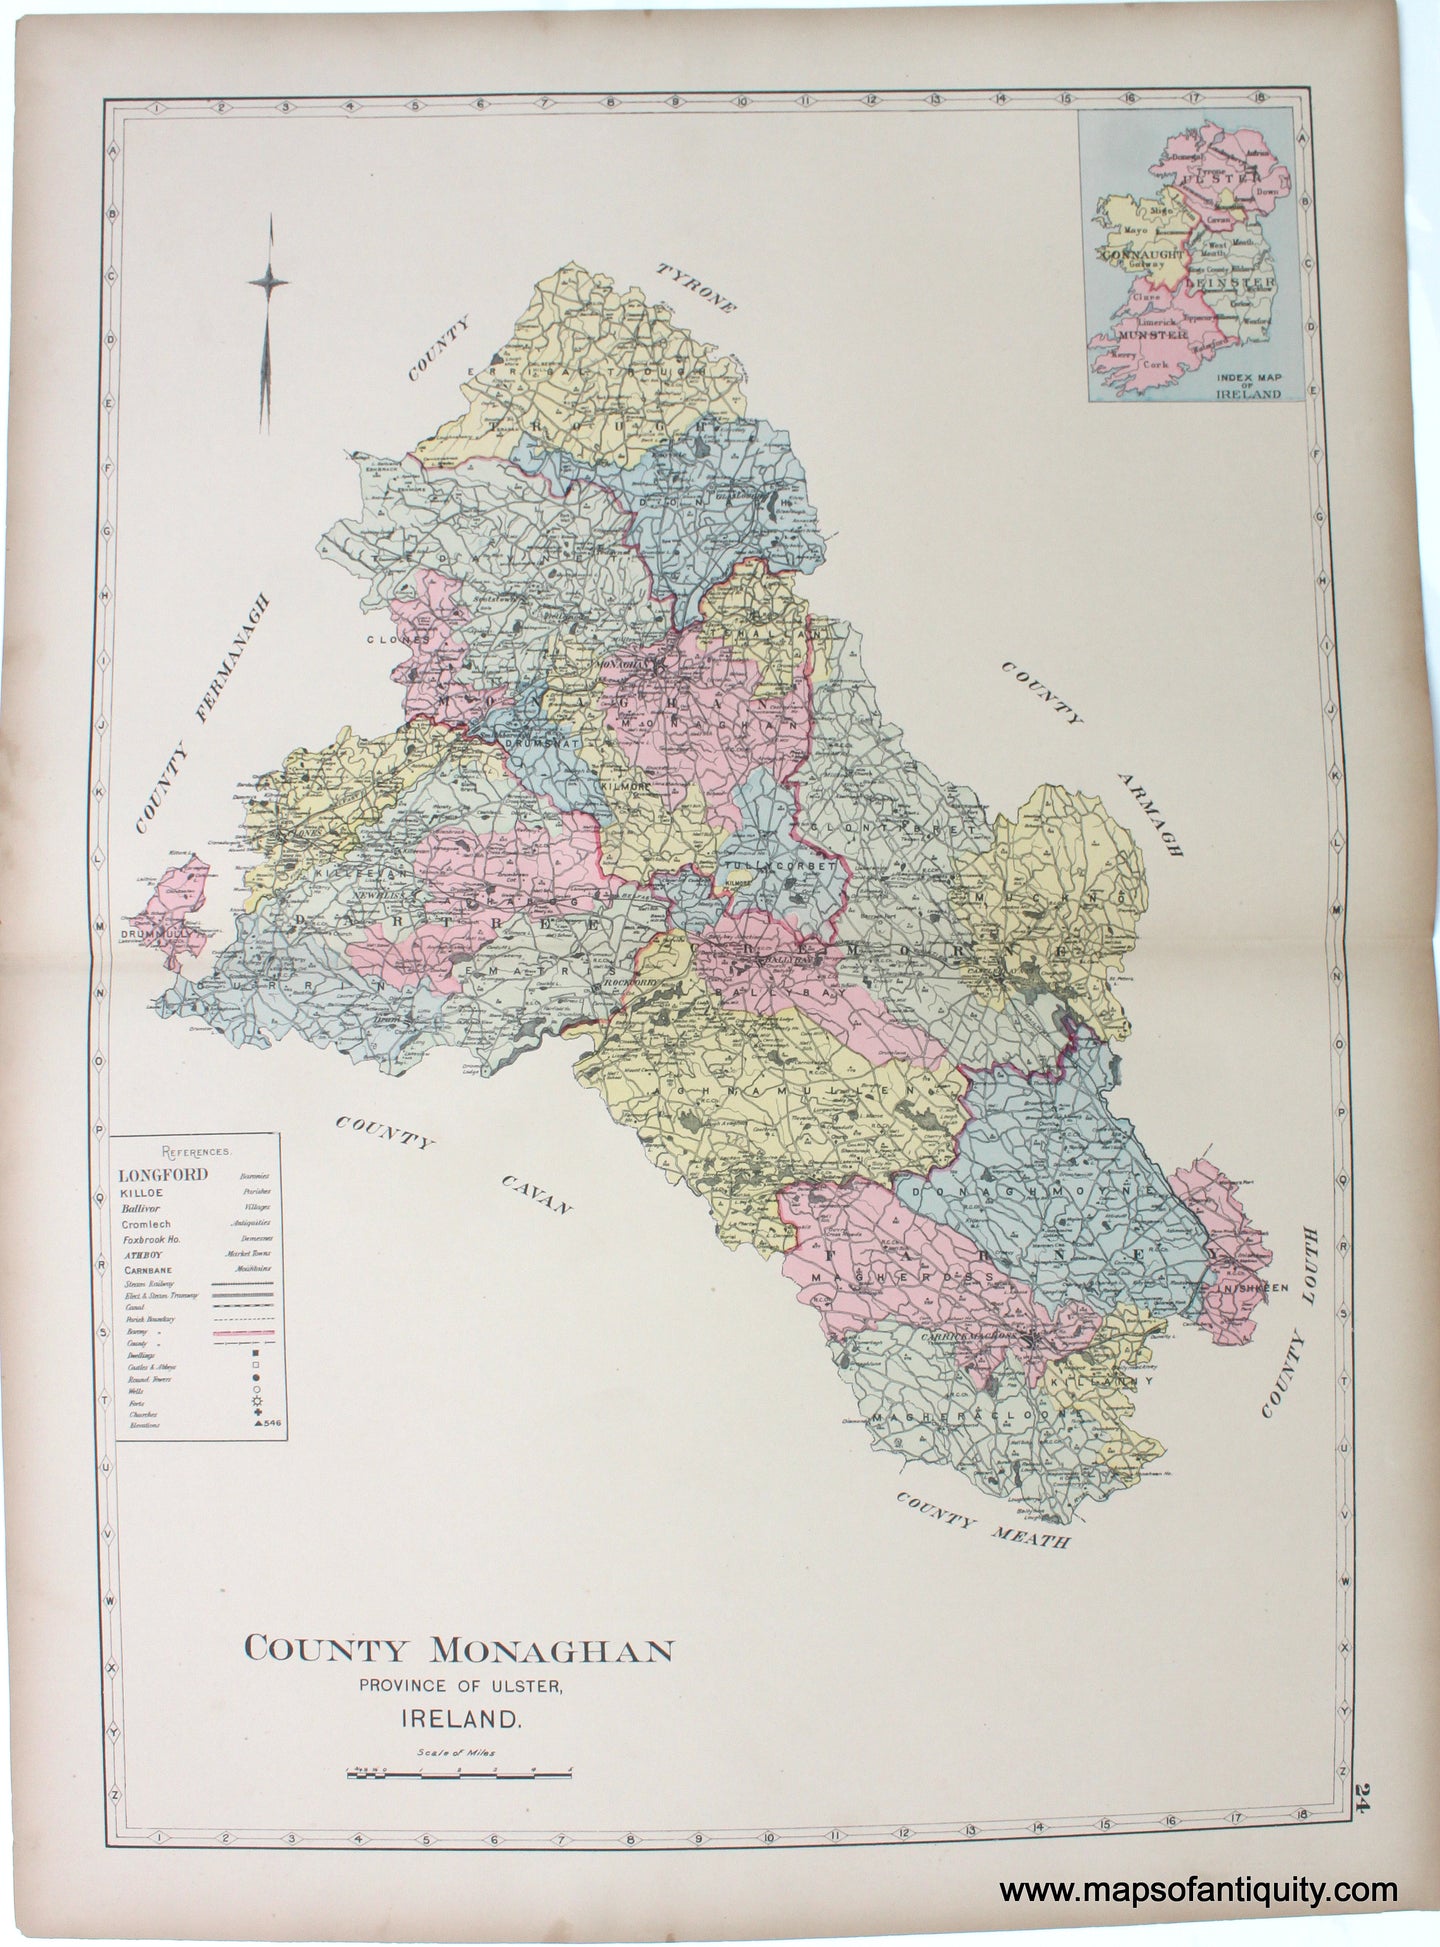 1901 - County Monaghan, Province of Ulster, Ireland. - Antique Map